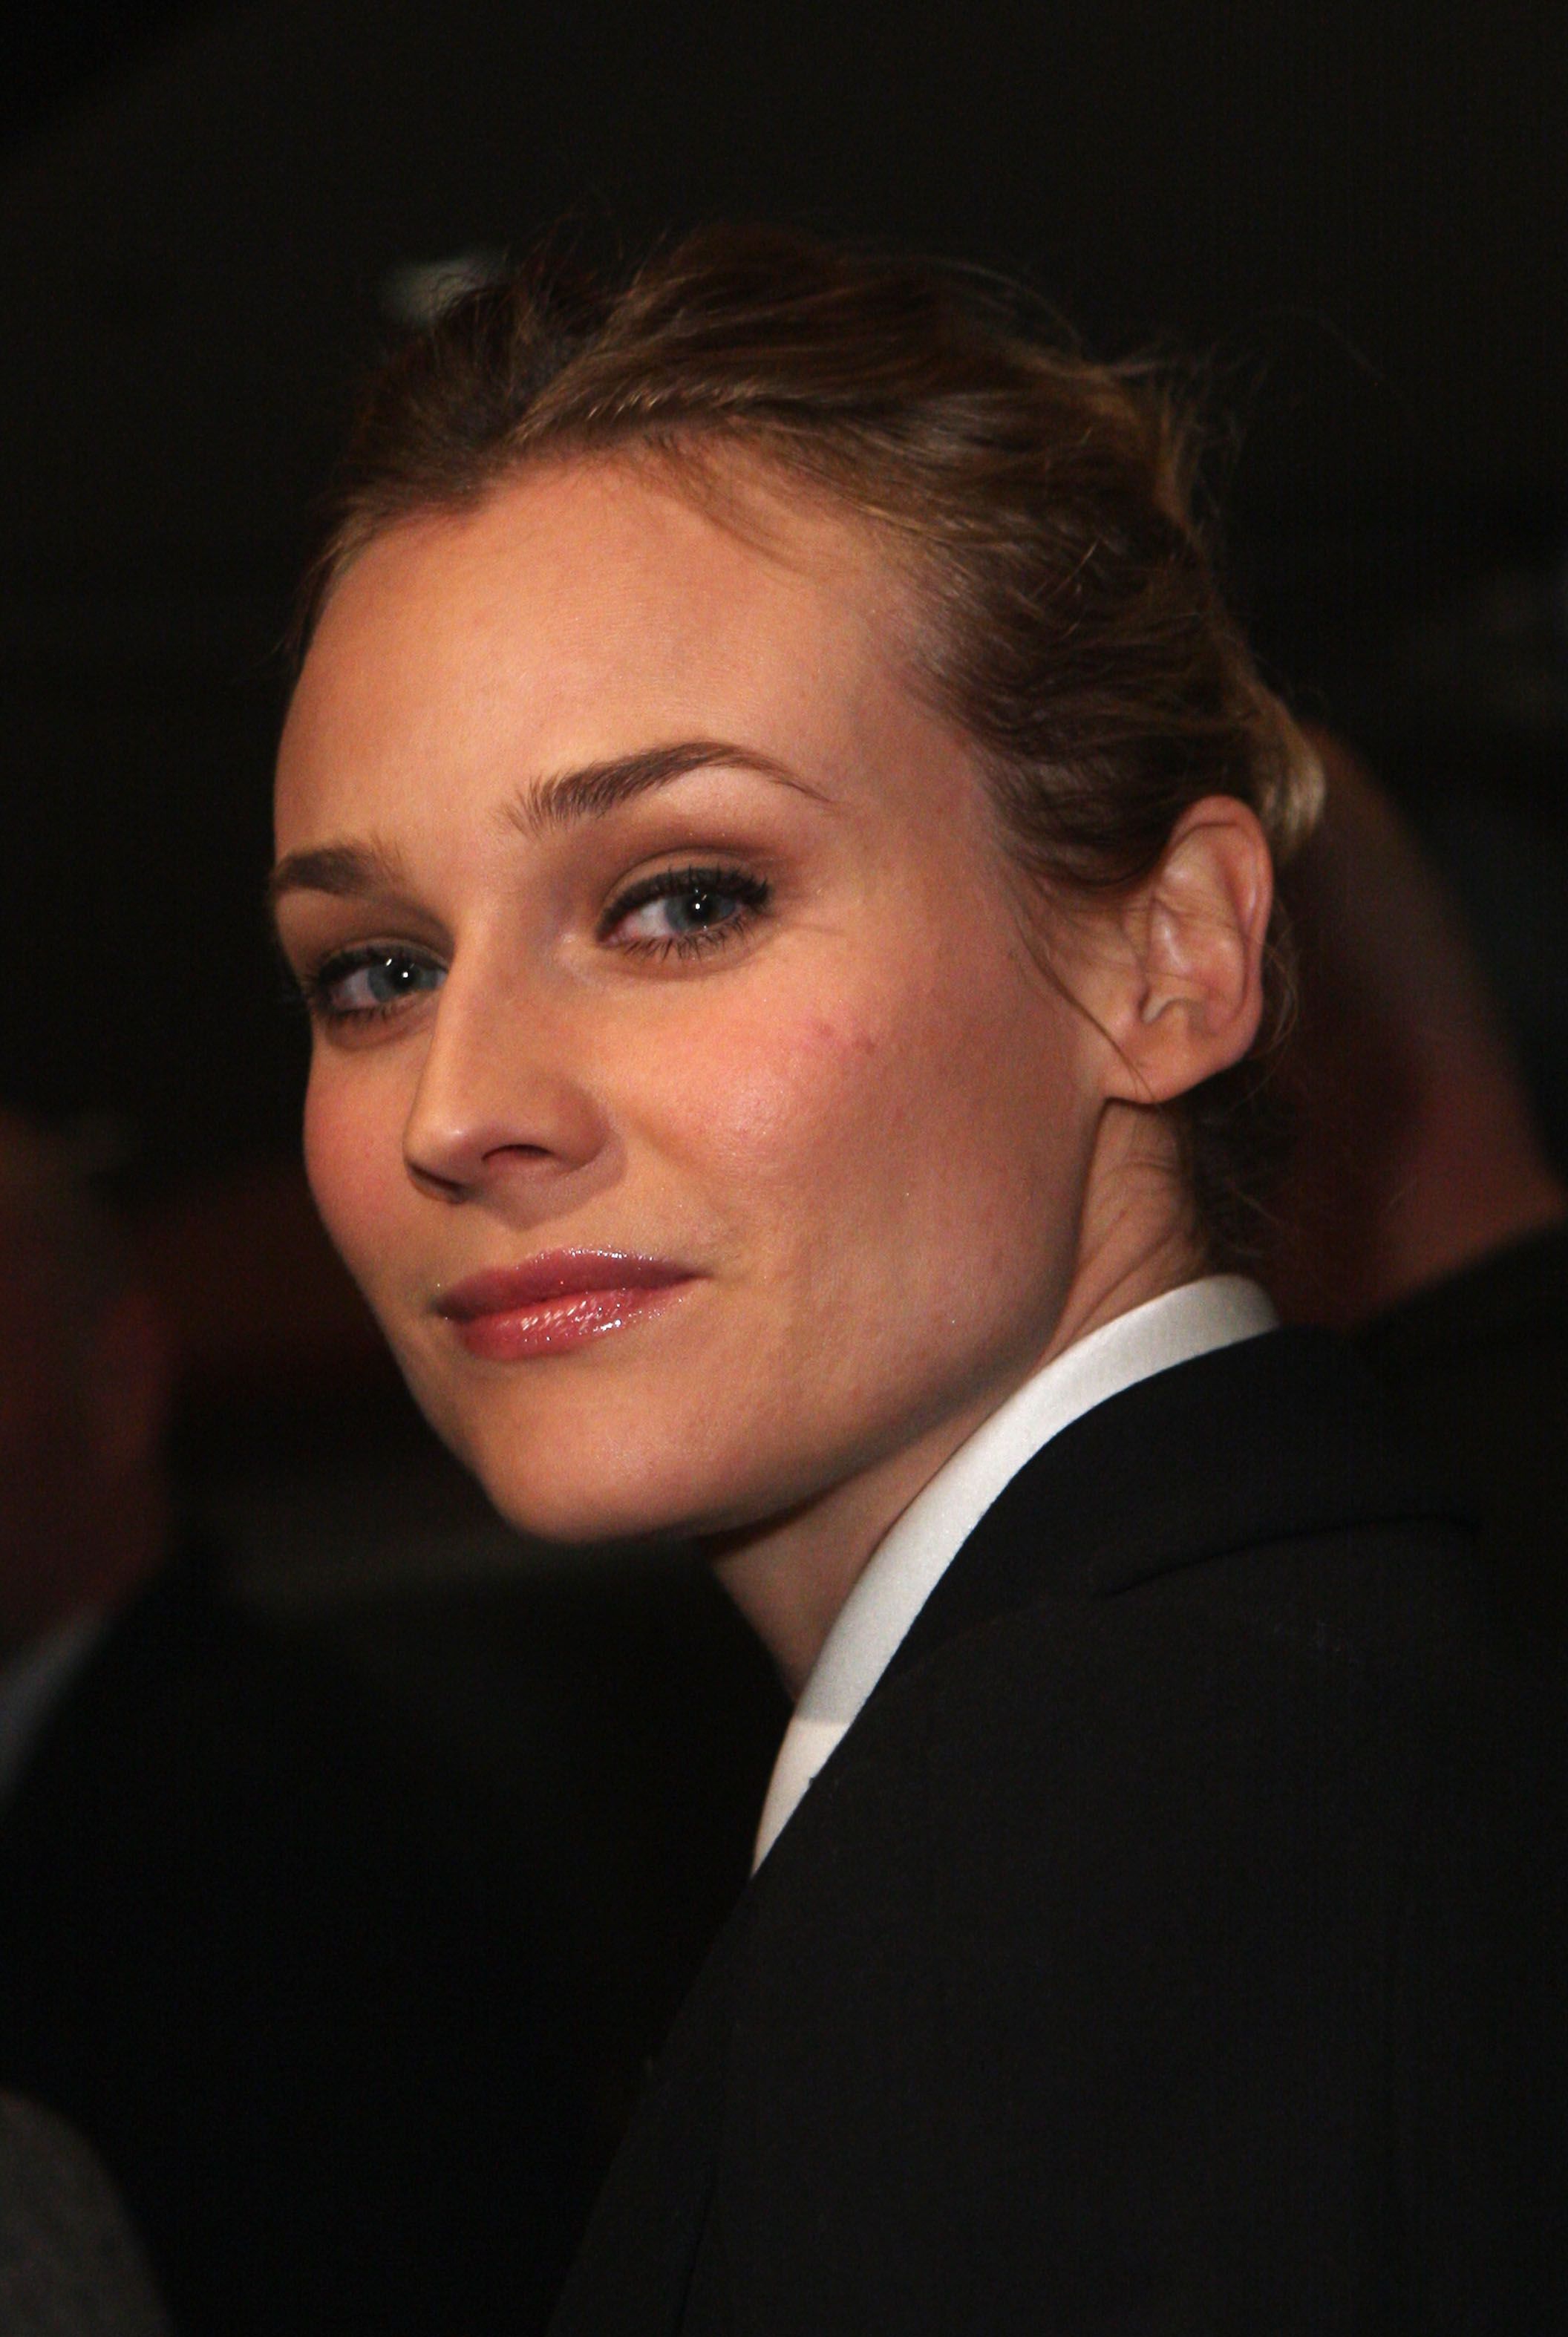 Diane Kruger Recalls 'Inappropriate' And 'Uncomfortable' Moments